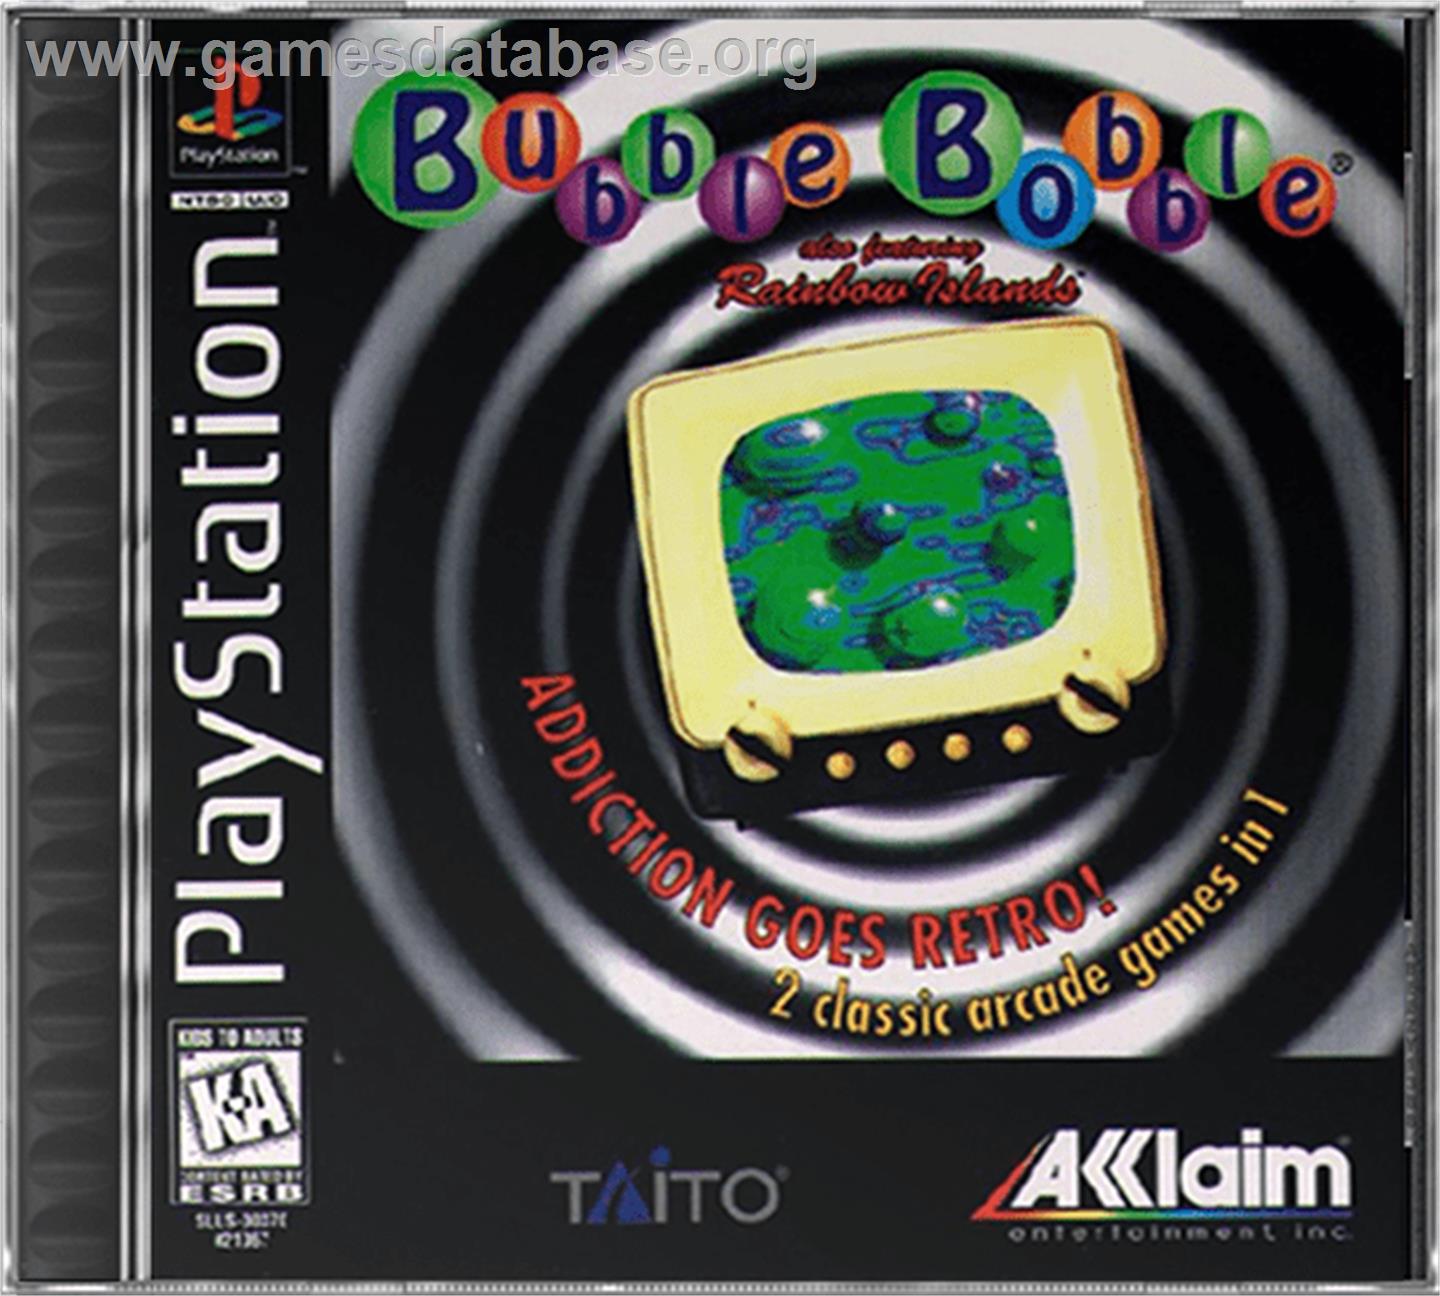 Bubble Bobble also featuring Rainbow Islands - Sony Playstation - Artwork - Box